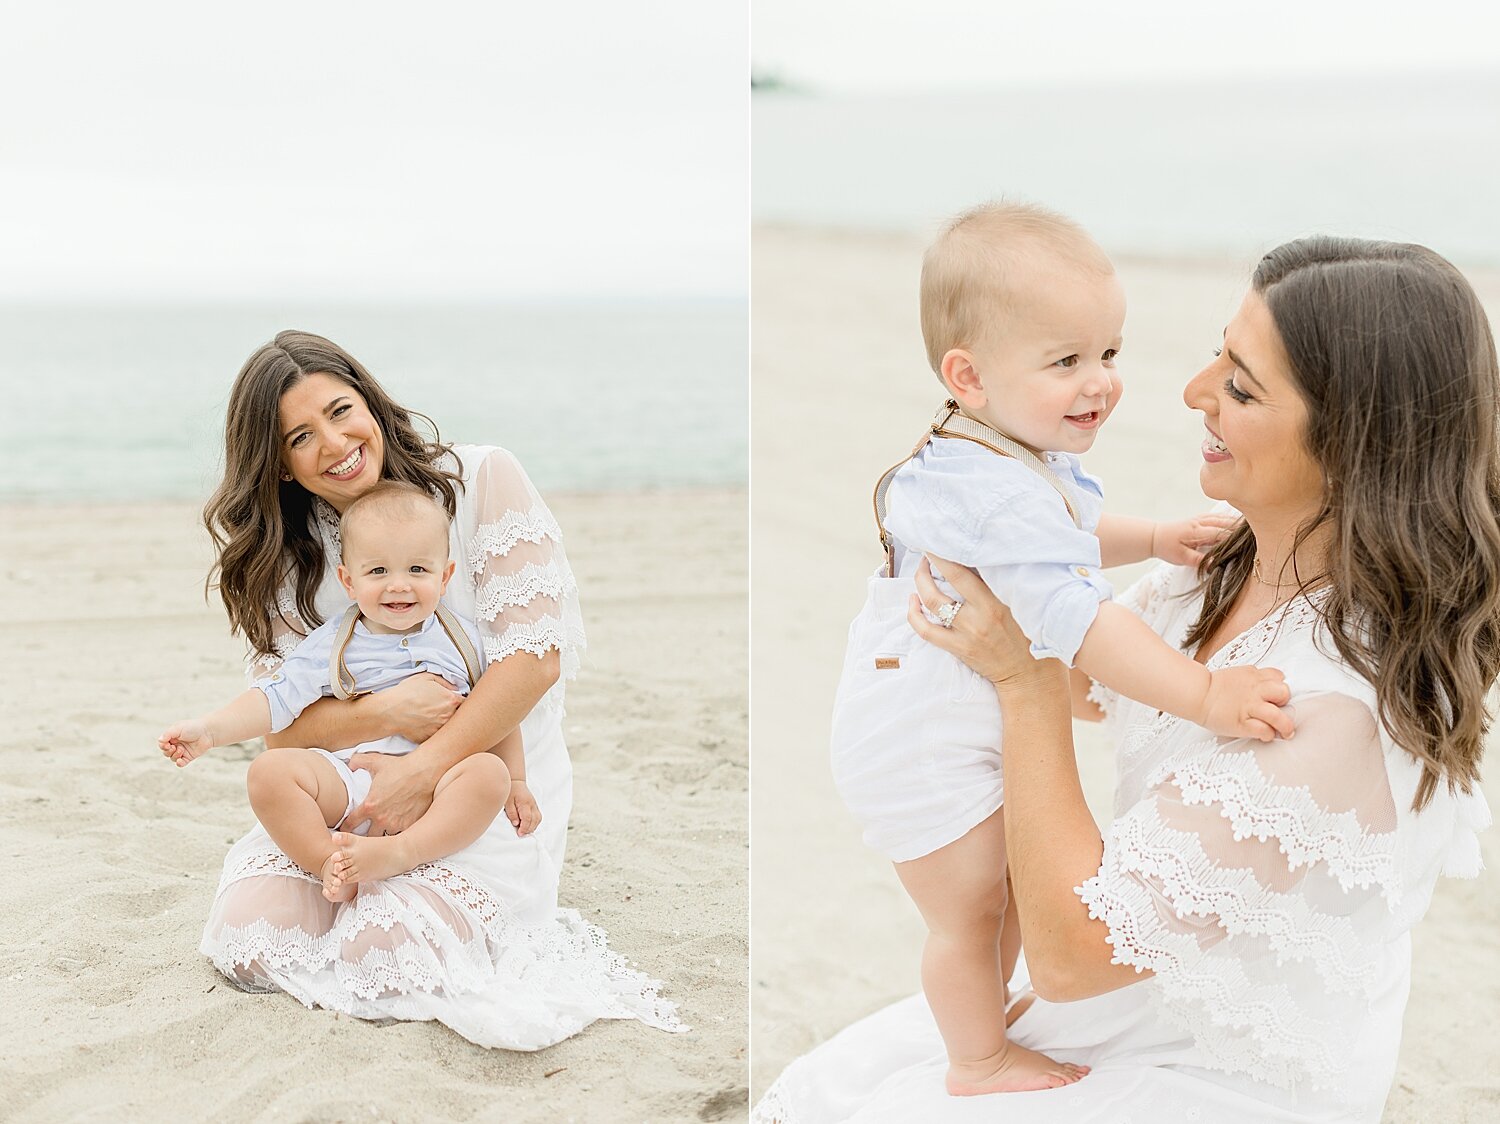 Mom sitting with her son on the beach | Kristin Wood Photography